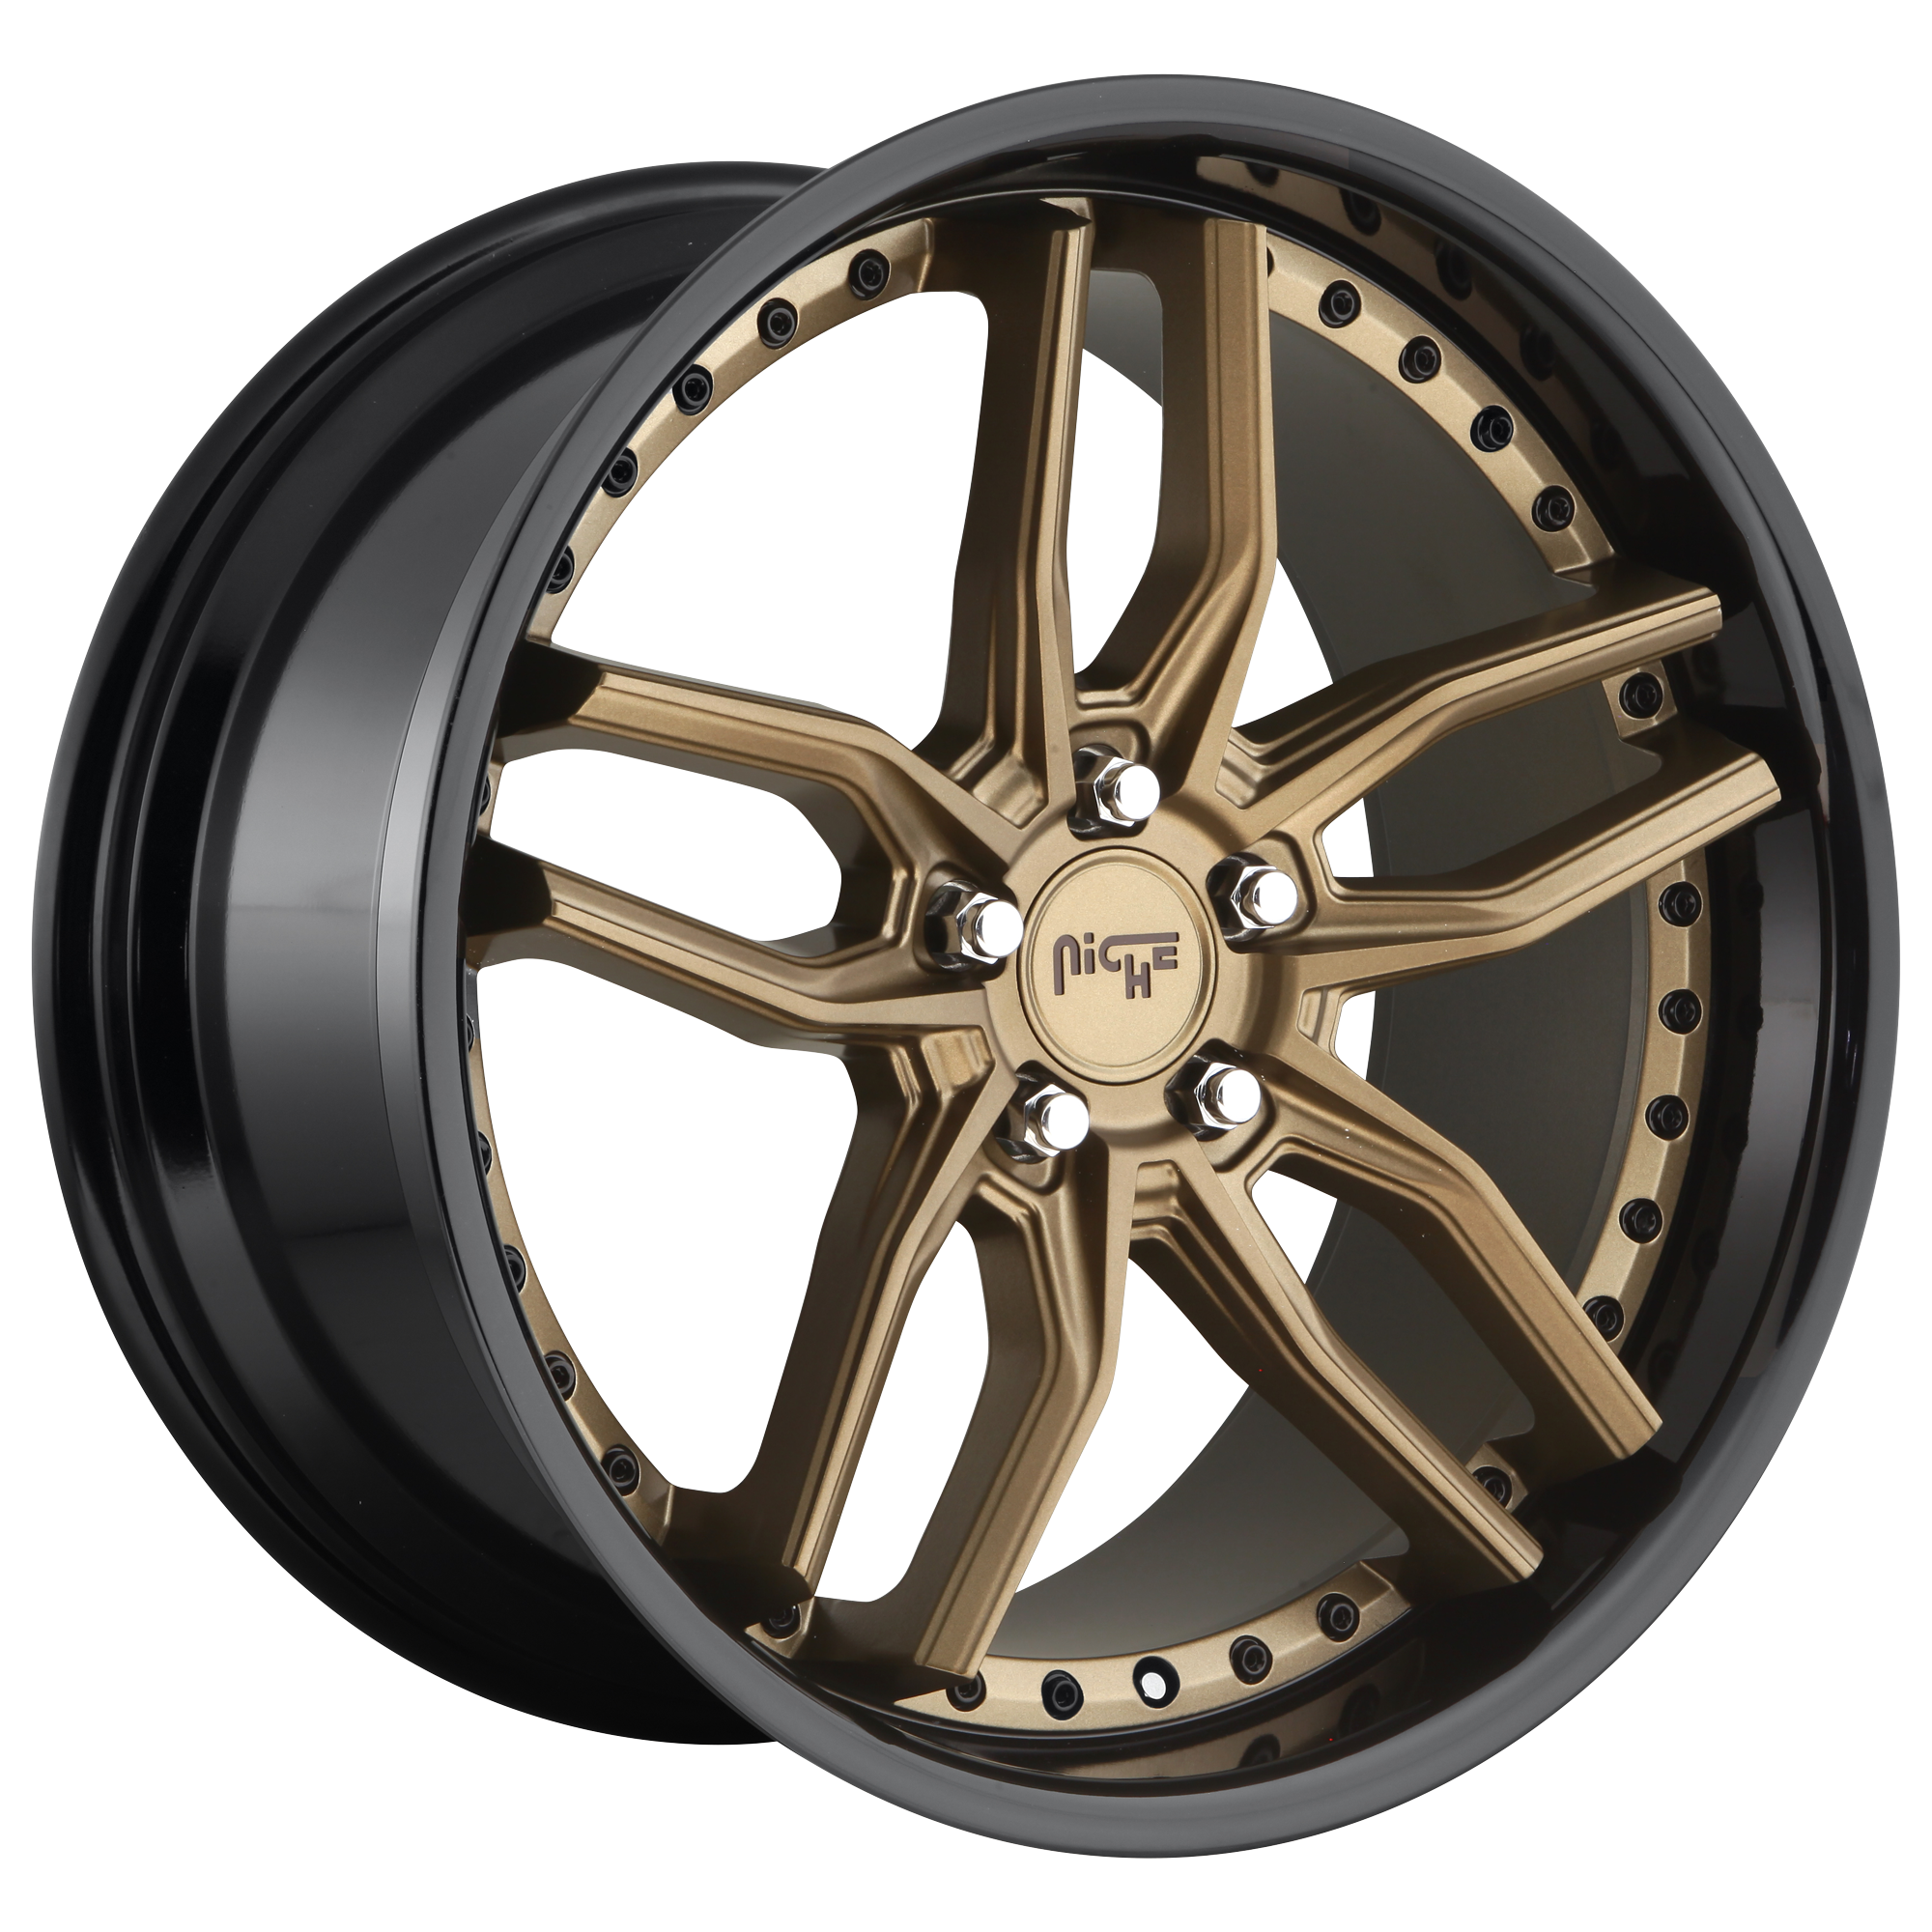 METHOS 20x10.5 5x114.30 MATTE BRONZE BLACK BEAD RING (40 mm) - Tires and Engine Performance